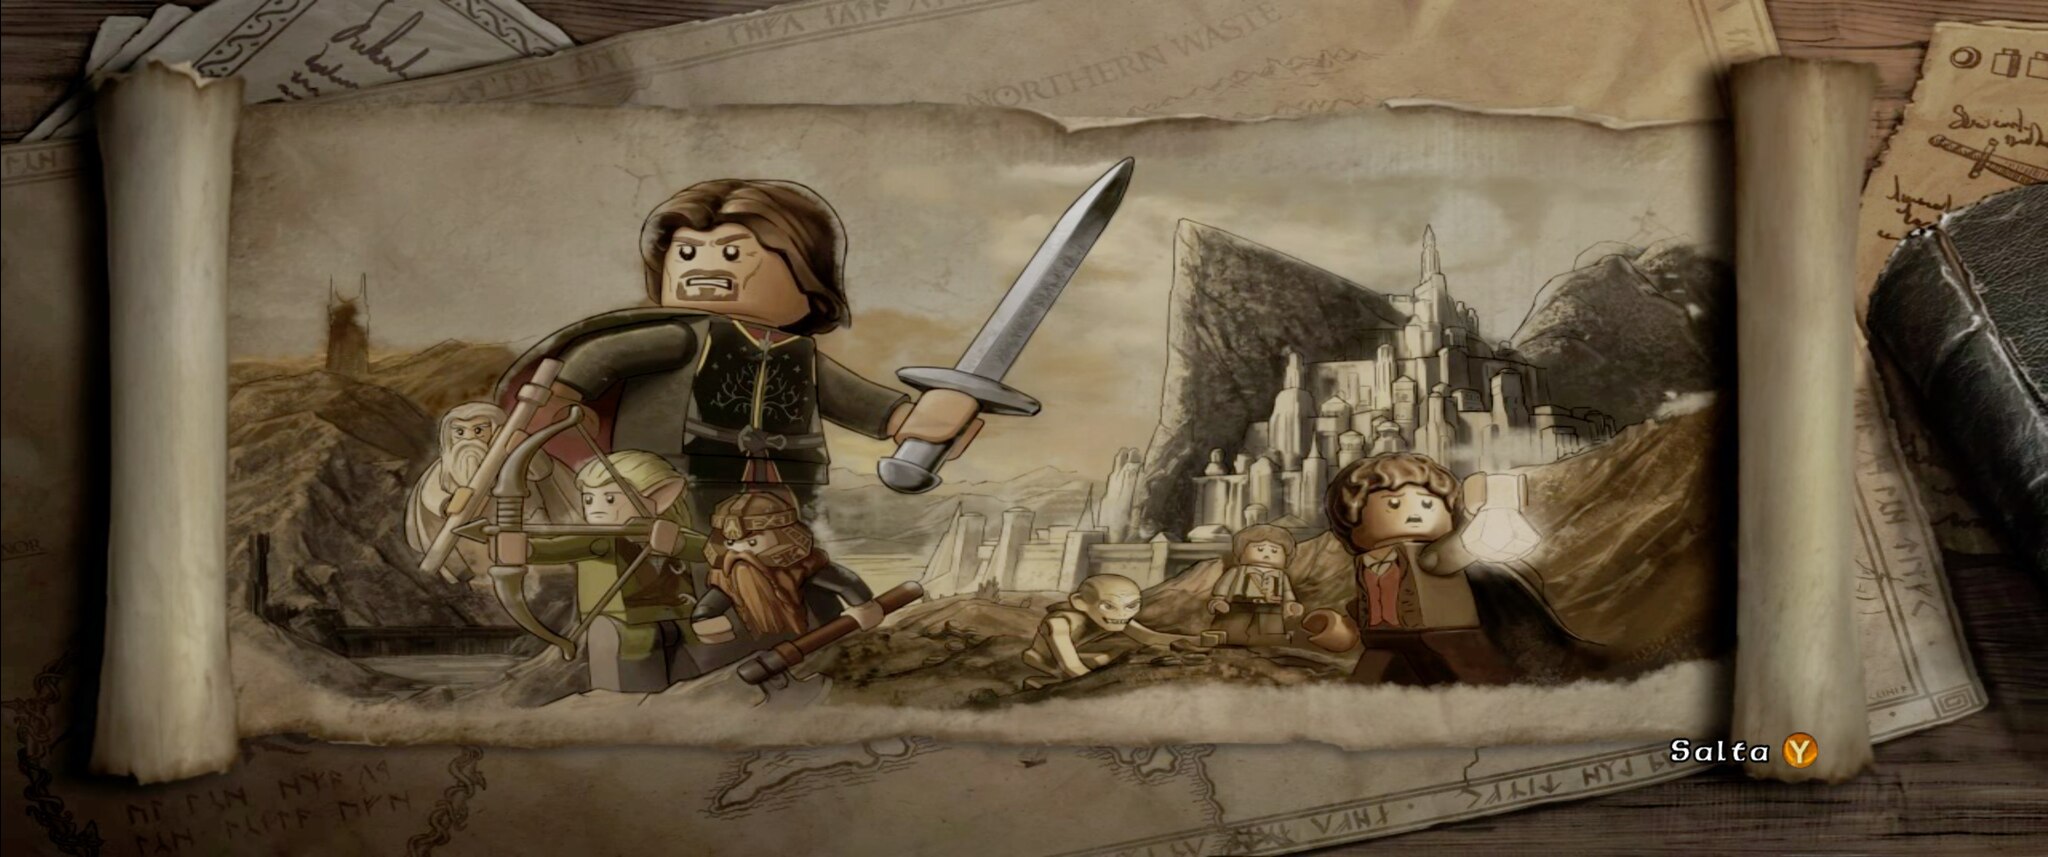 lego lord of the rings steam code